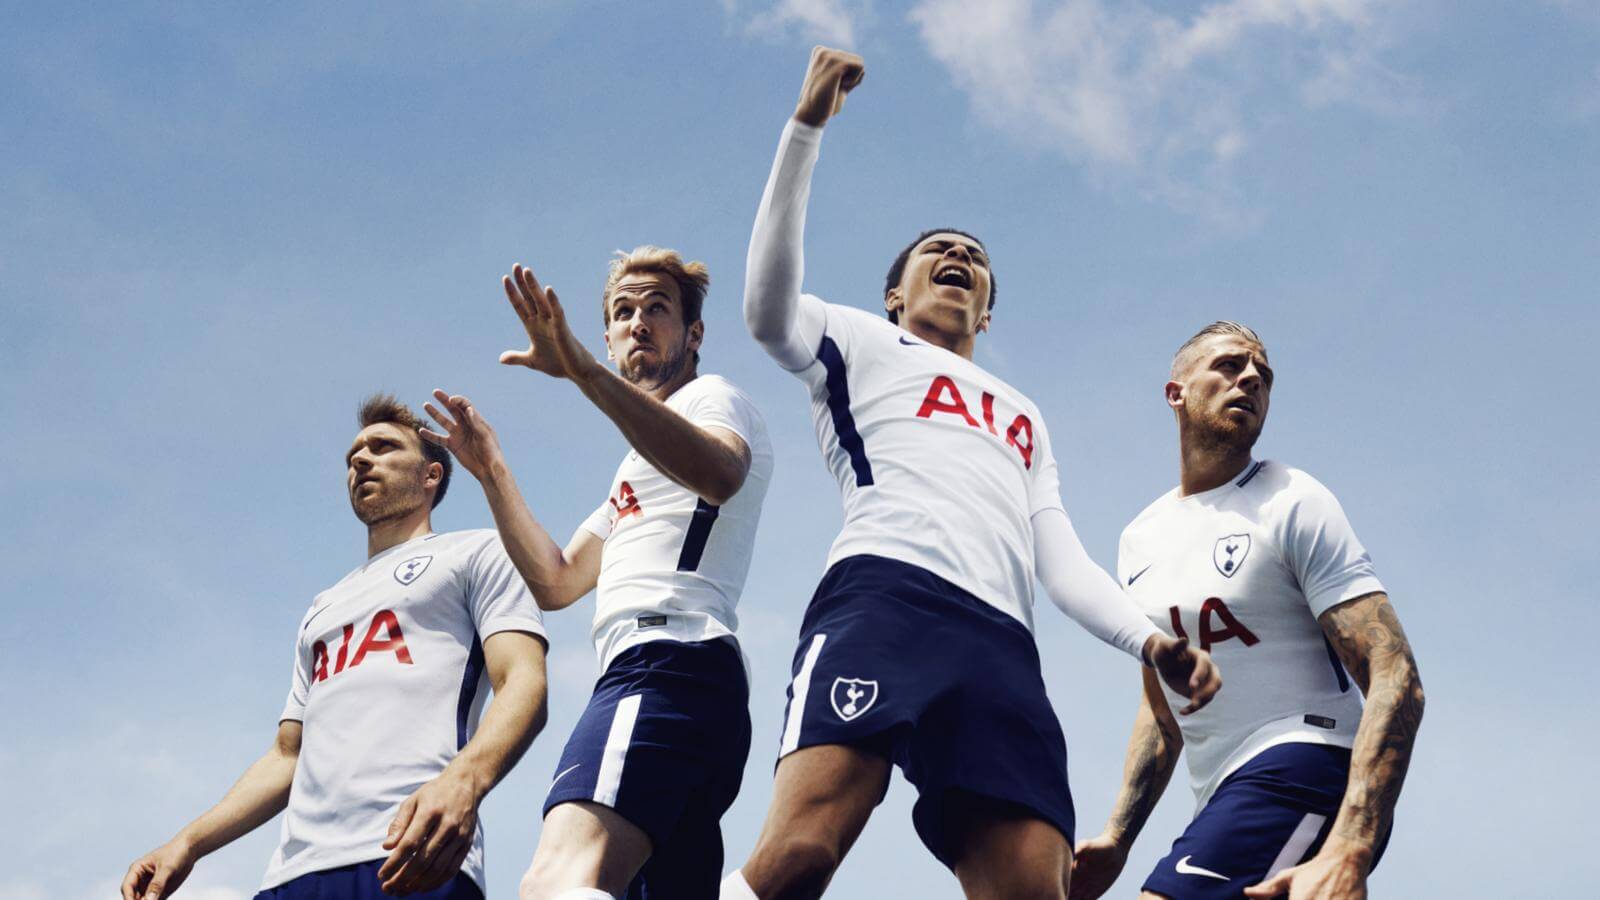 Spurs’ sleek new Nike outfit for Wembley Way next season